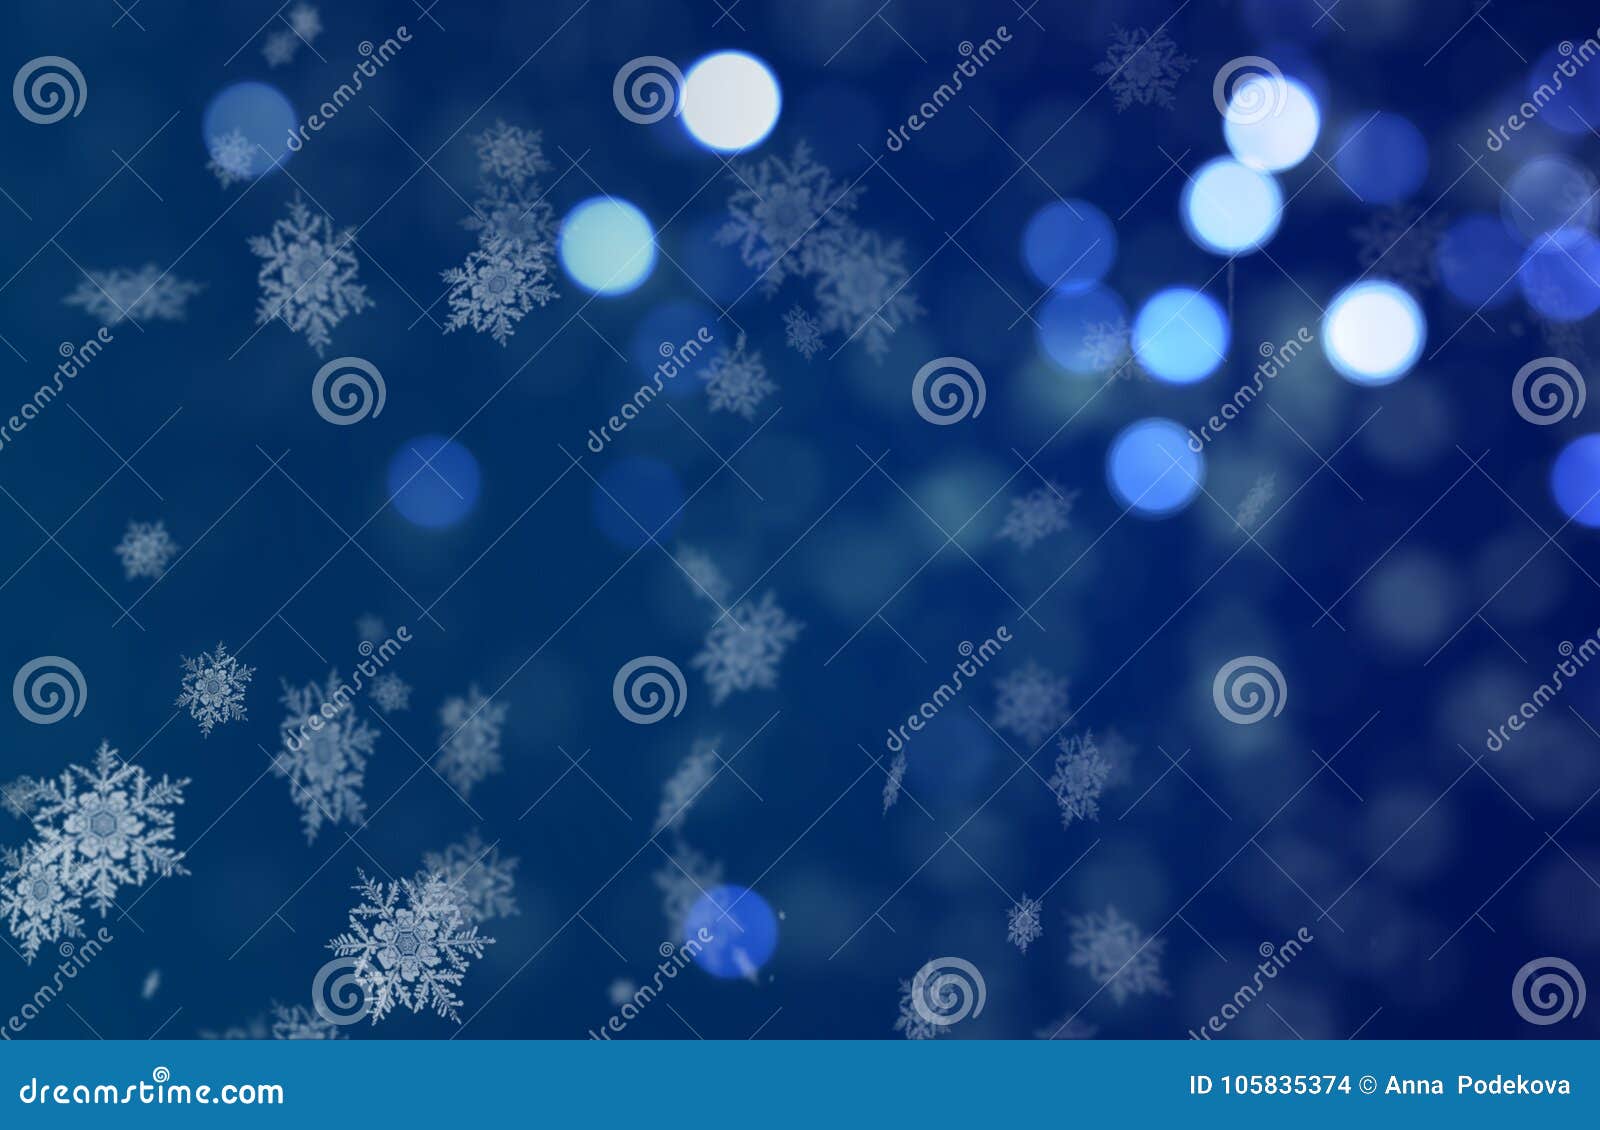 christmass mood snowflakes falling on a blue bokeh background